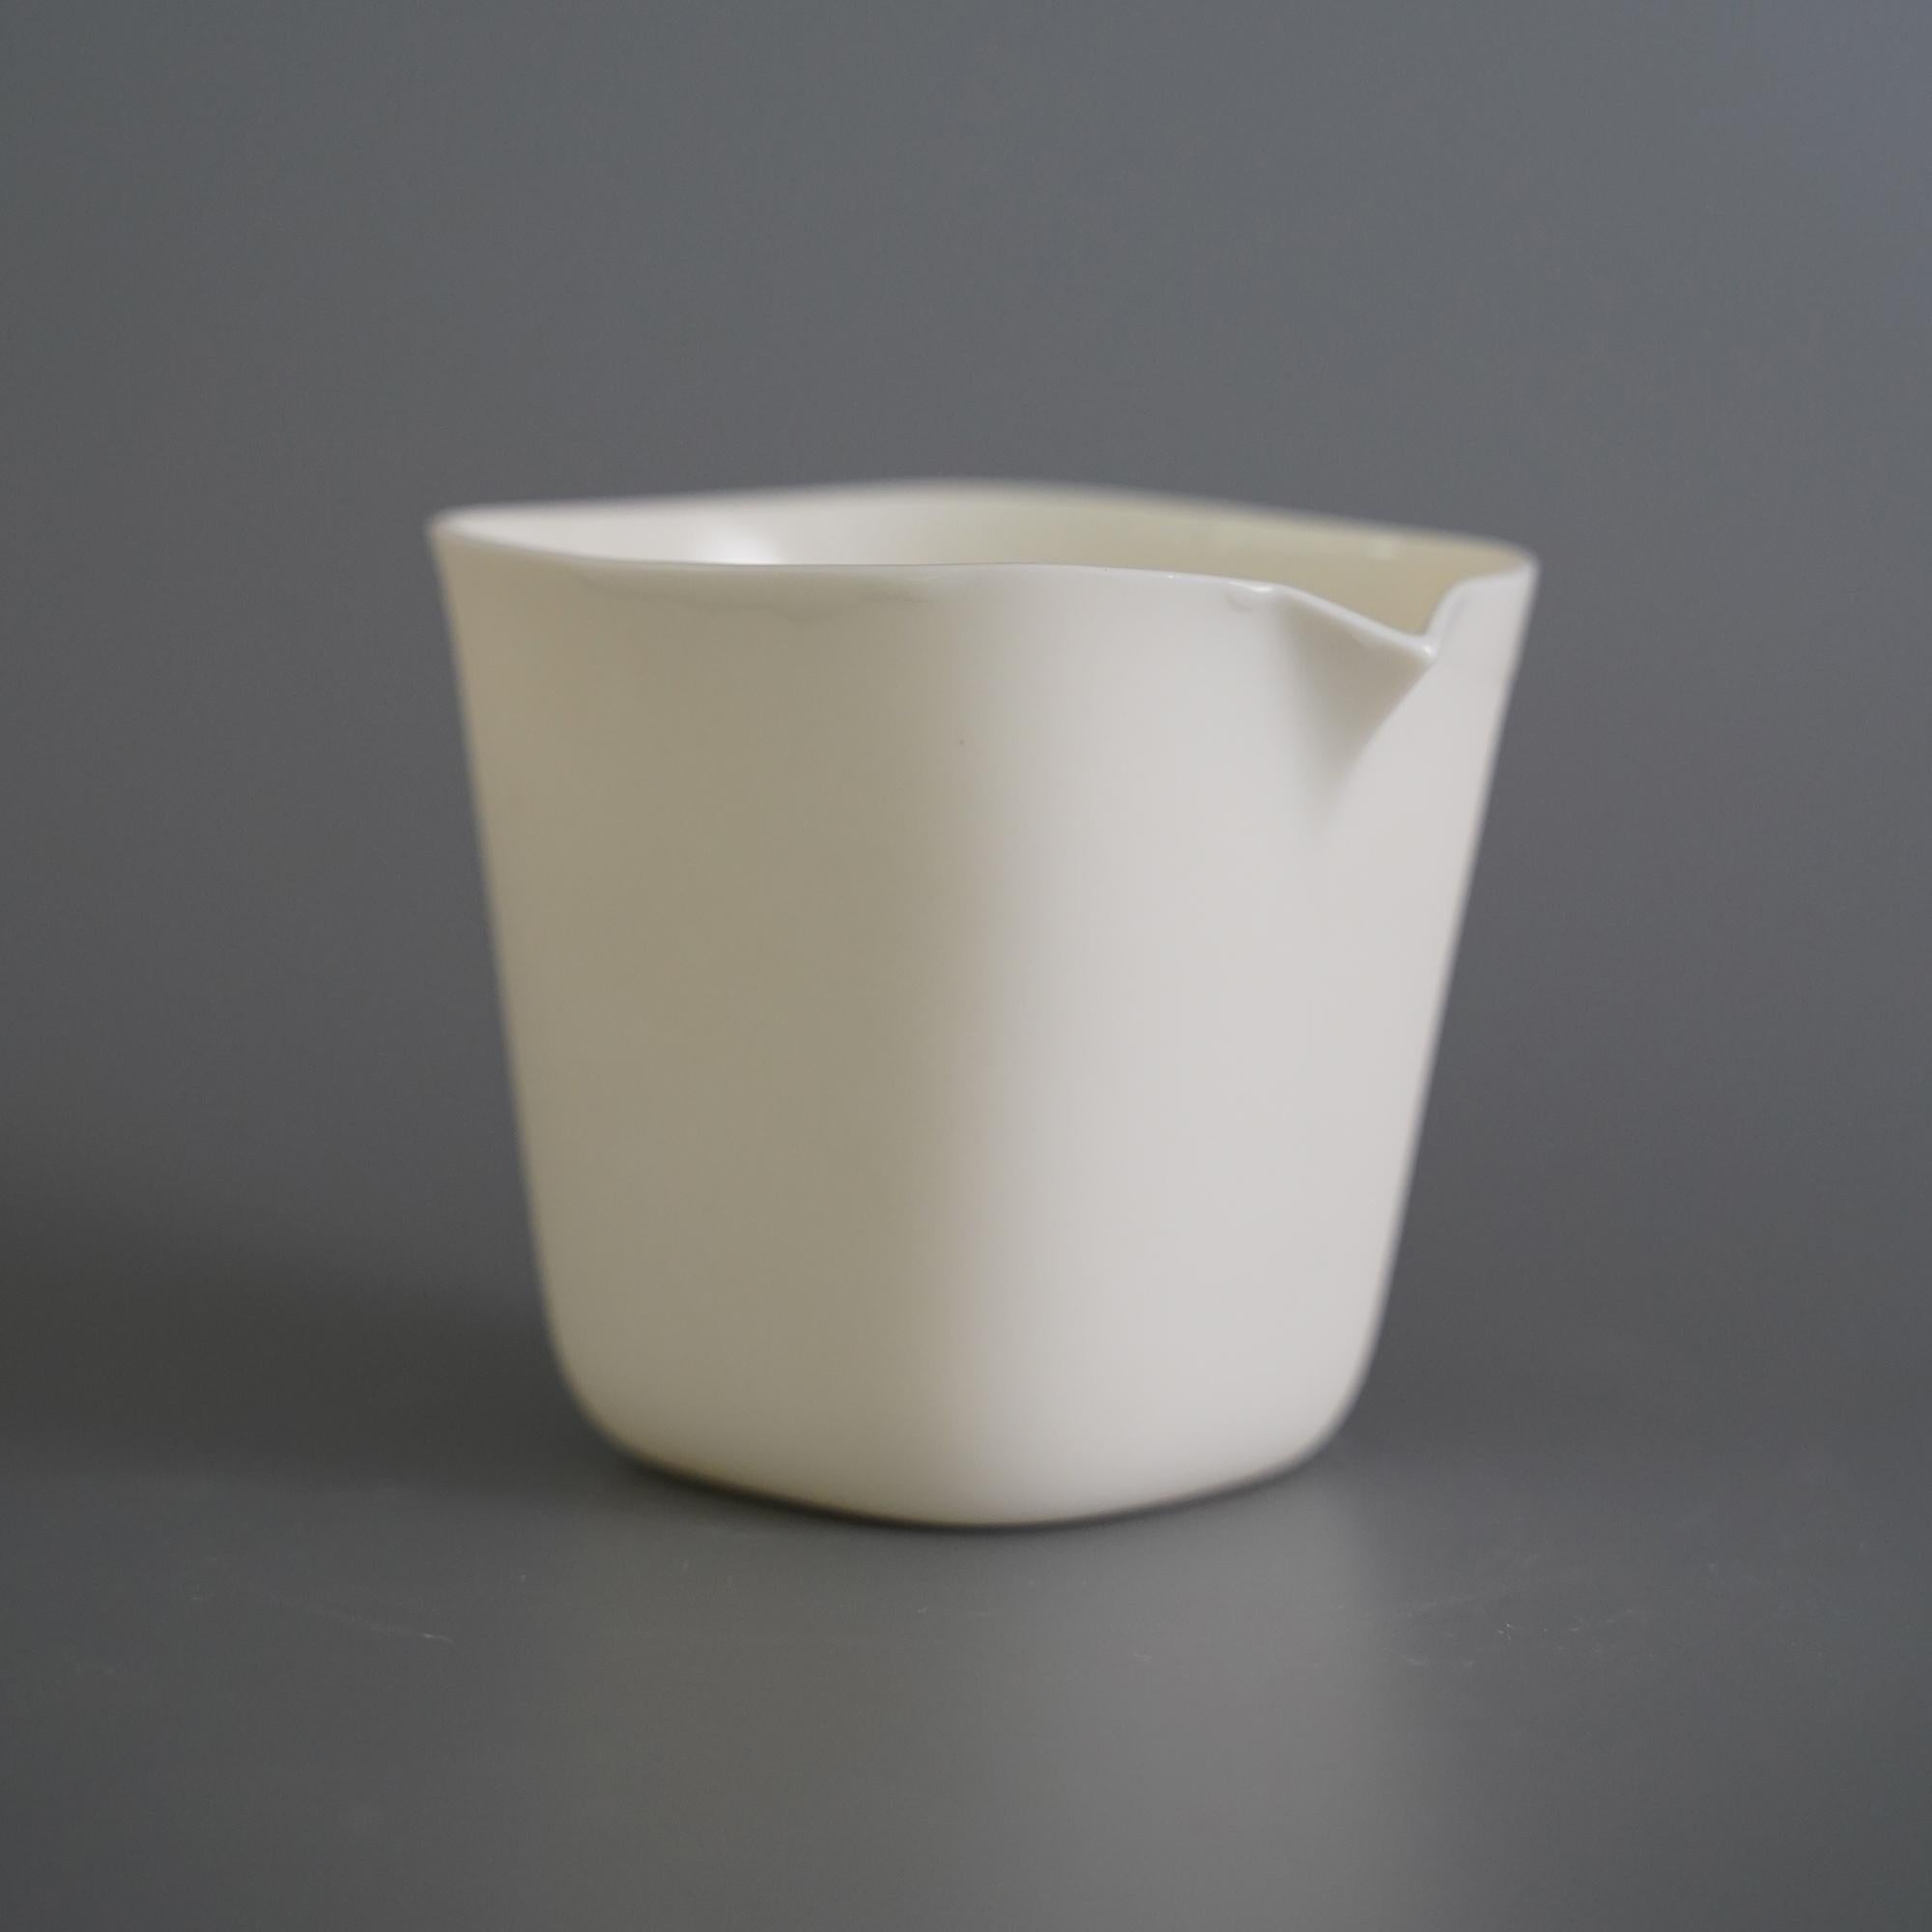 Set of 4 Ceti serving bowl by Studio Cúze
Dimensions: D 9 x W 8 x H 8 cm
Materials: ceramic

Ceti is a handmade, white ceramic dispenser that offers a very smooth surface. The interior has been coated with a glaze that allows a slight